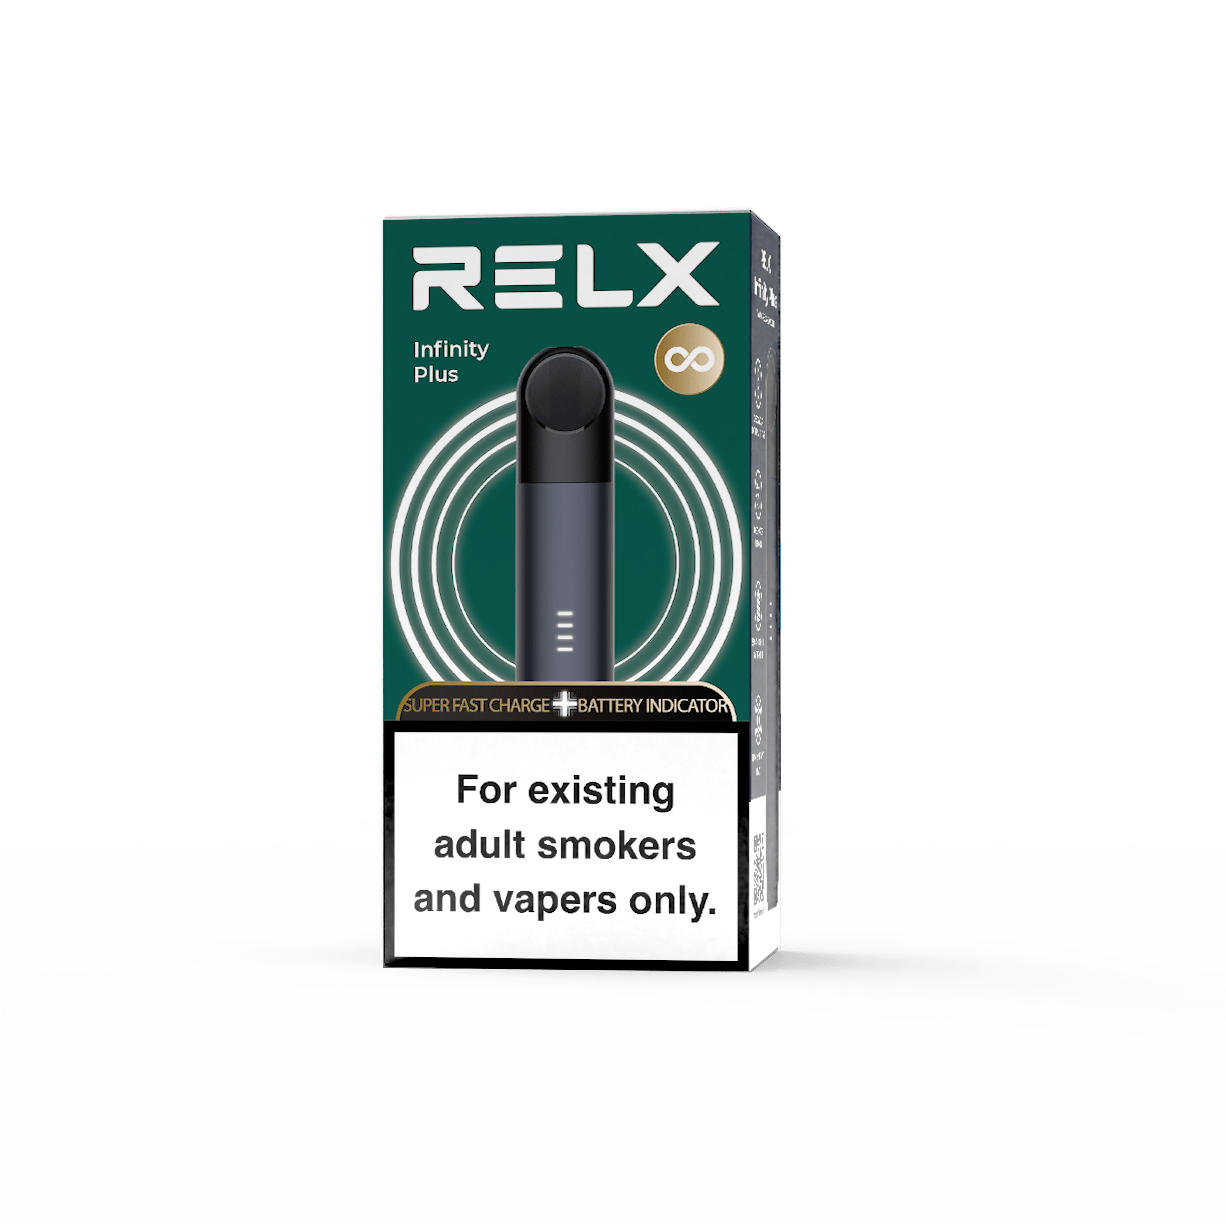 RELX Official｜Infinity Plus Vape Device